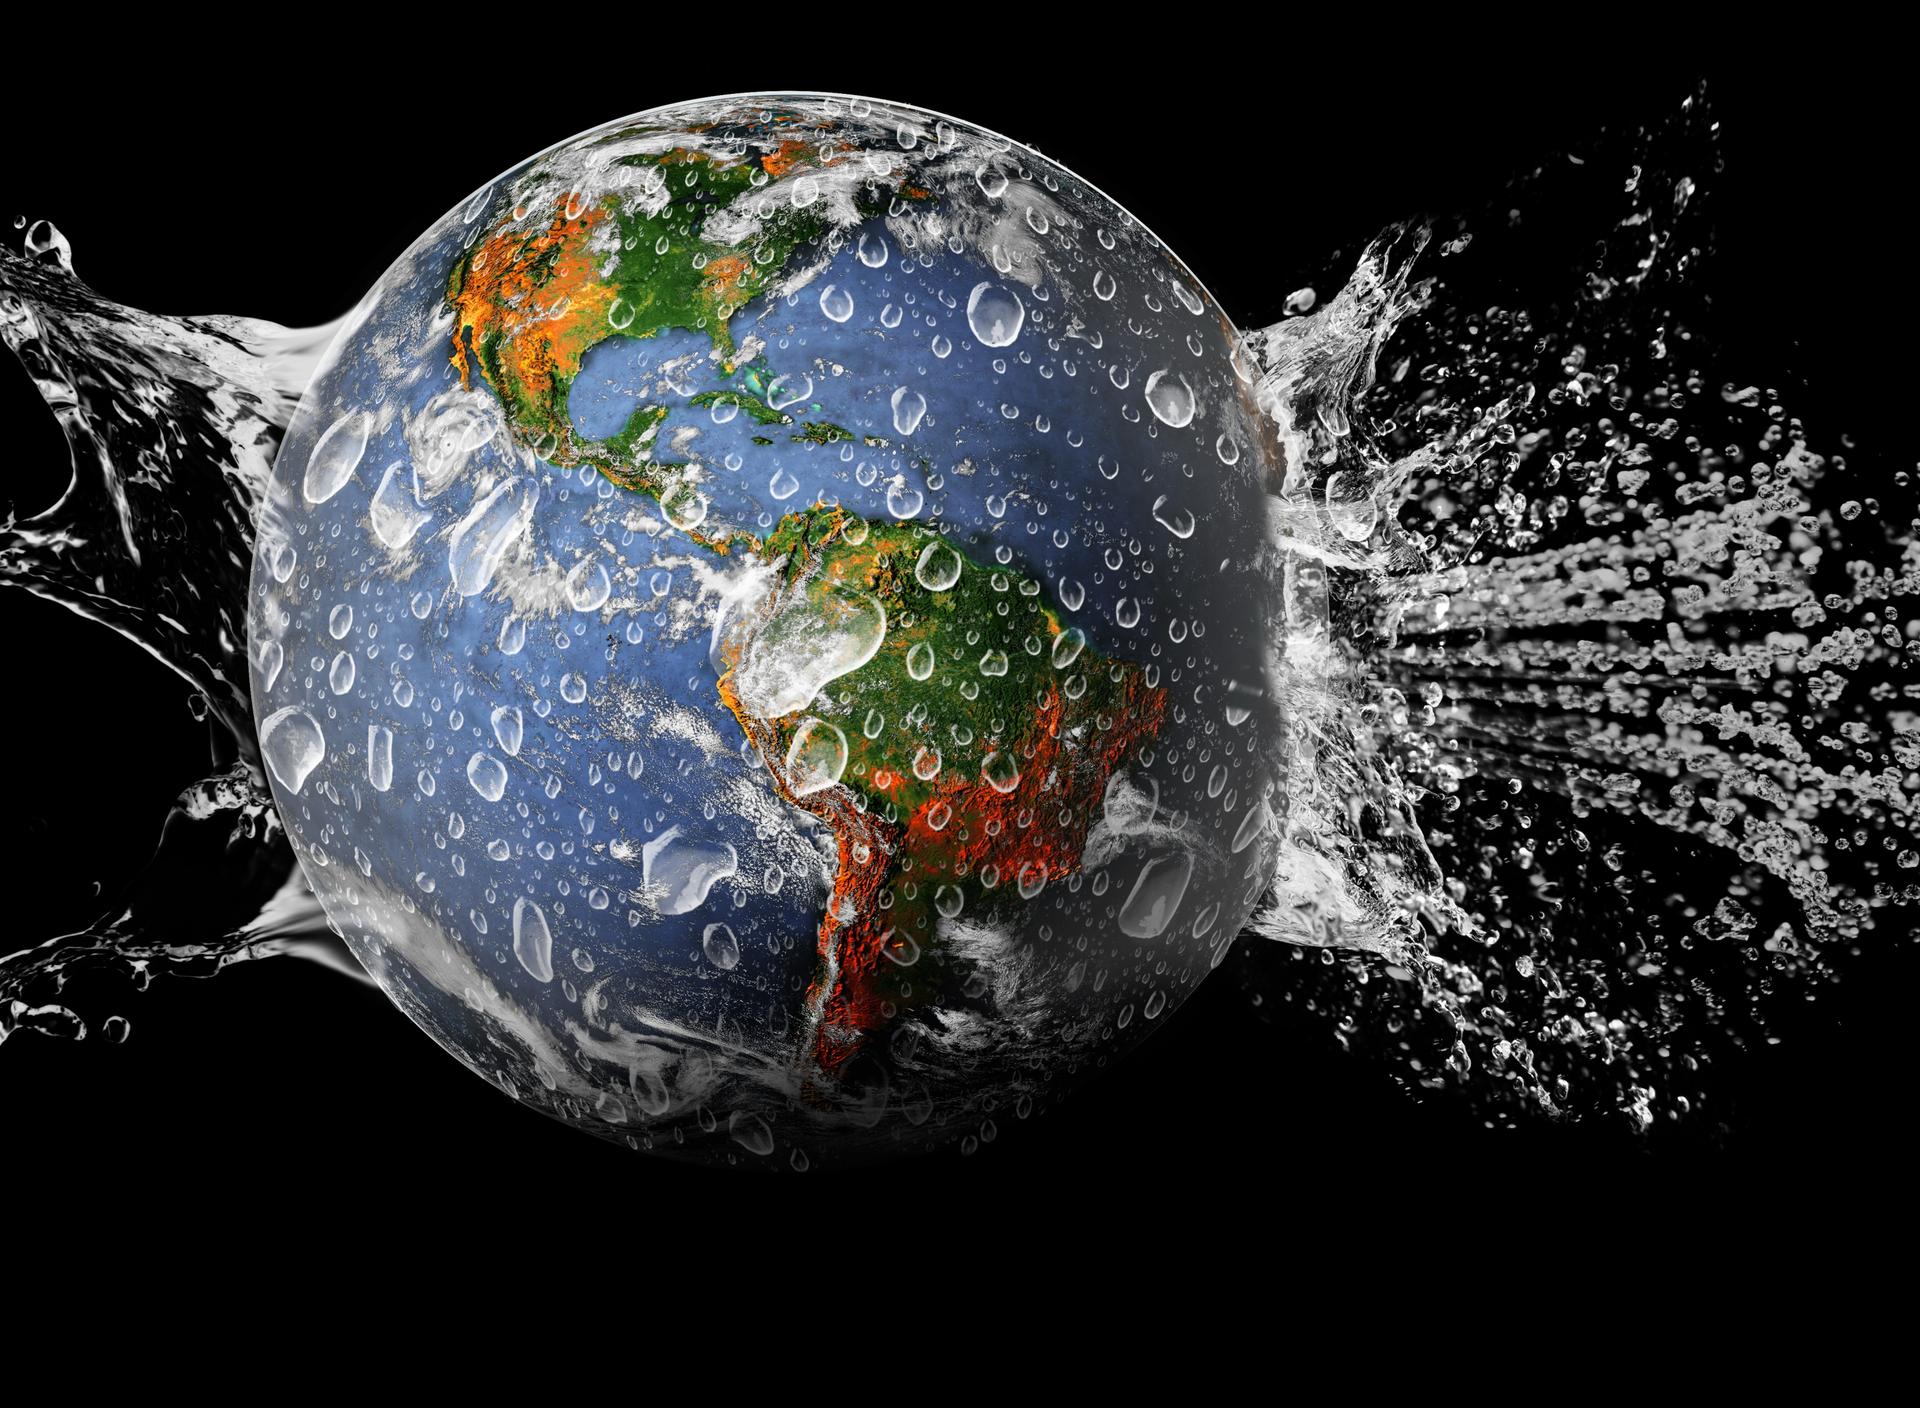 The Earth Globe in the water on the black background